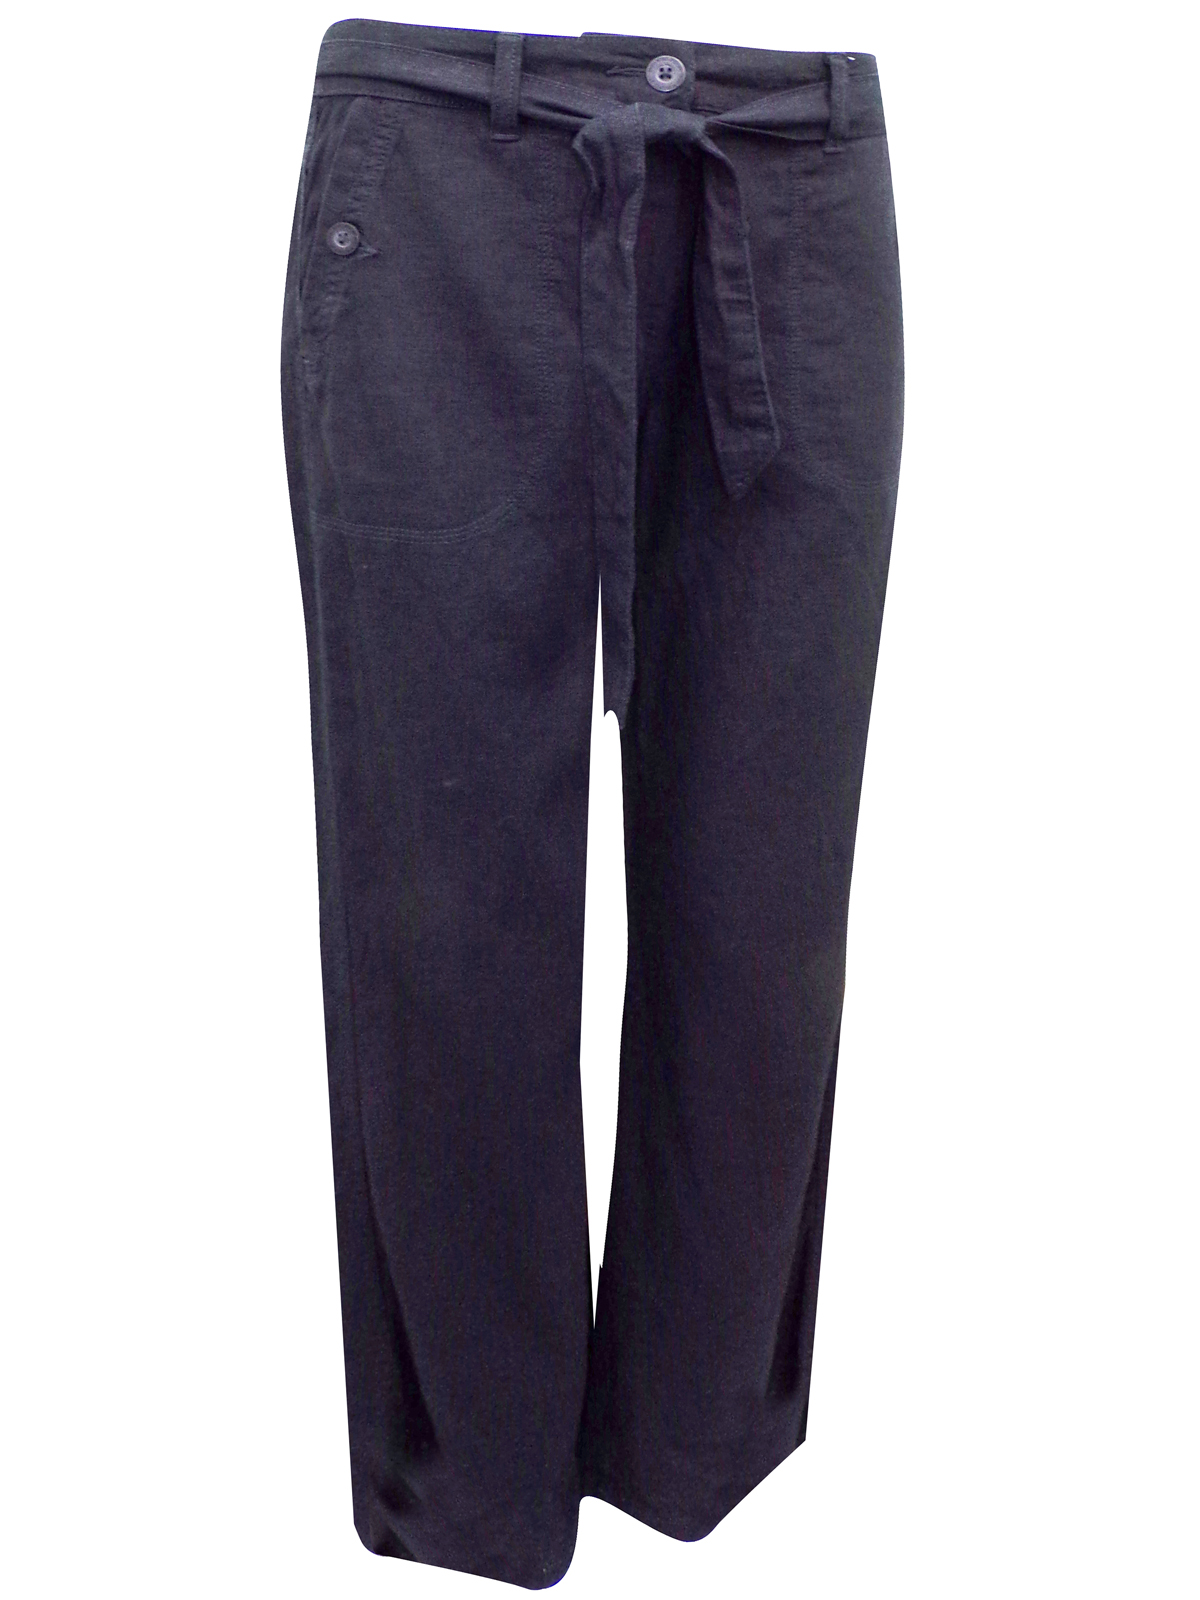 Marks and Spencer - - M&5 BLACK Linen Blend Belted Trousers - Size 10 to 14